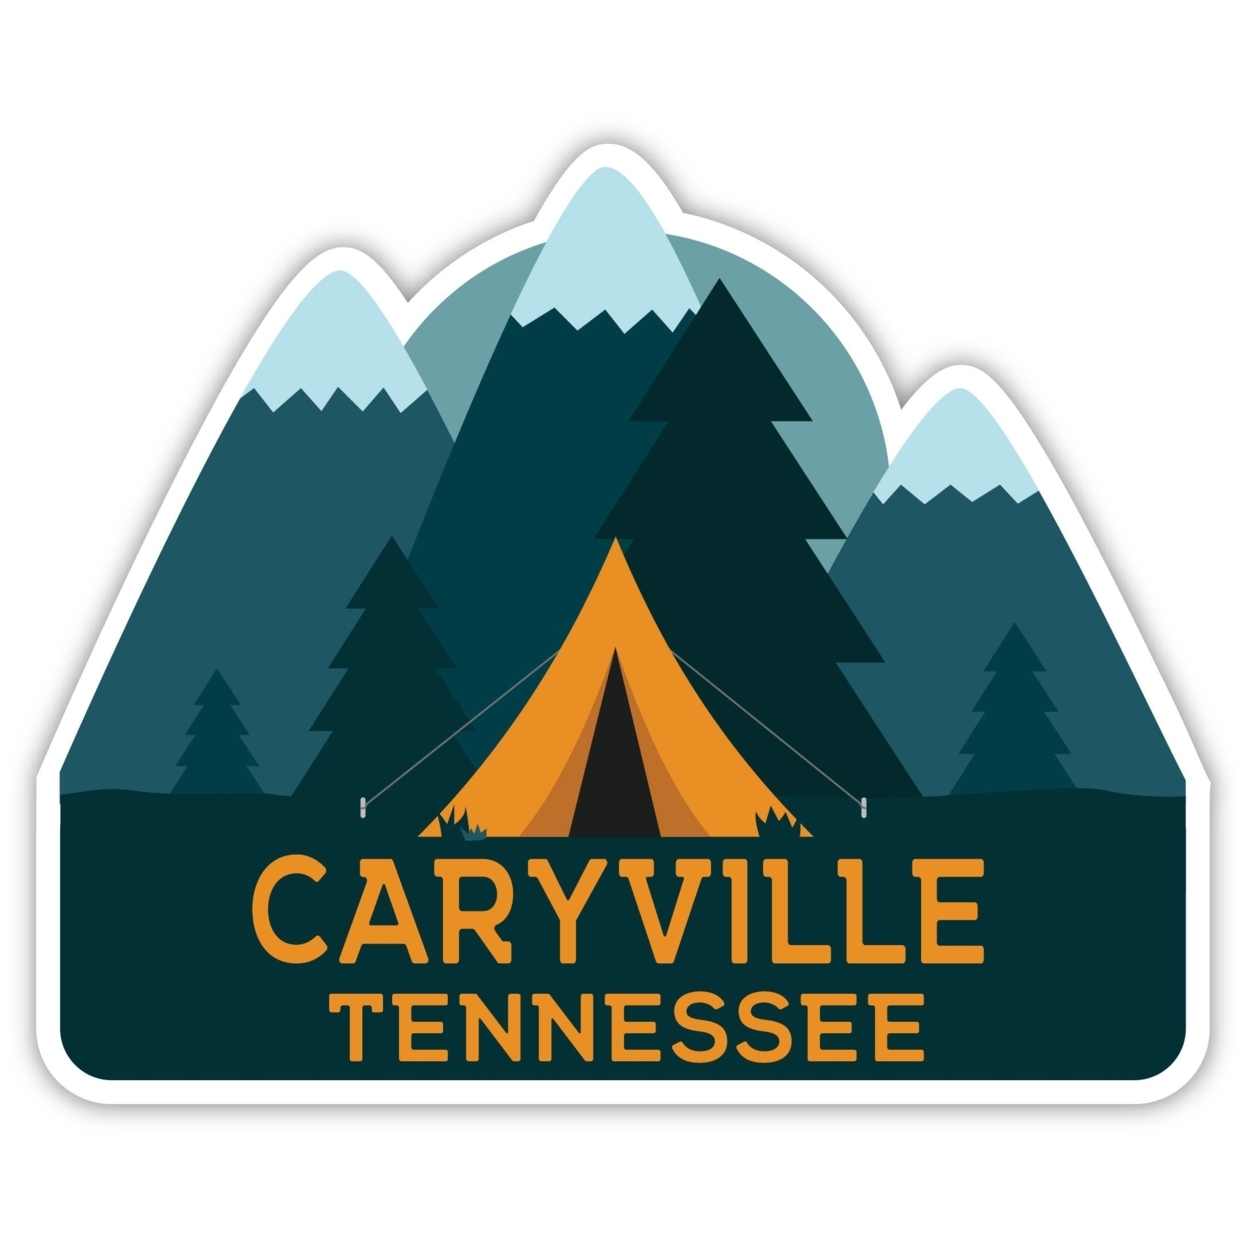 Caryville Tennessee Souvenir Decorative Stickers (Choose Theme And Size) - 4-Pack, 10-Inch, Tent